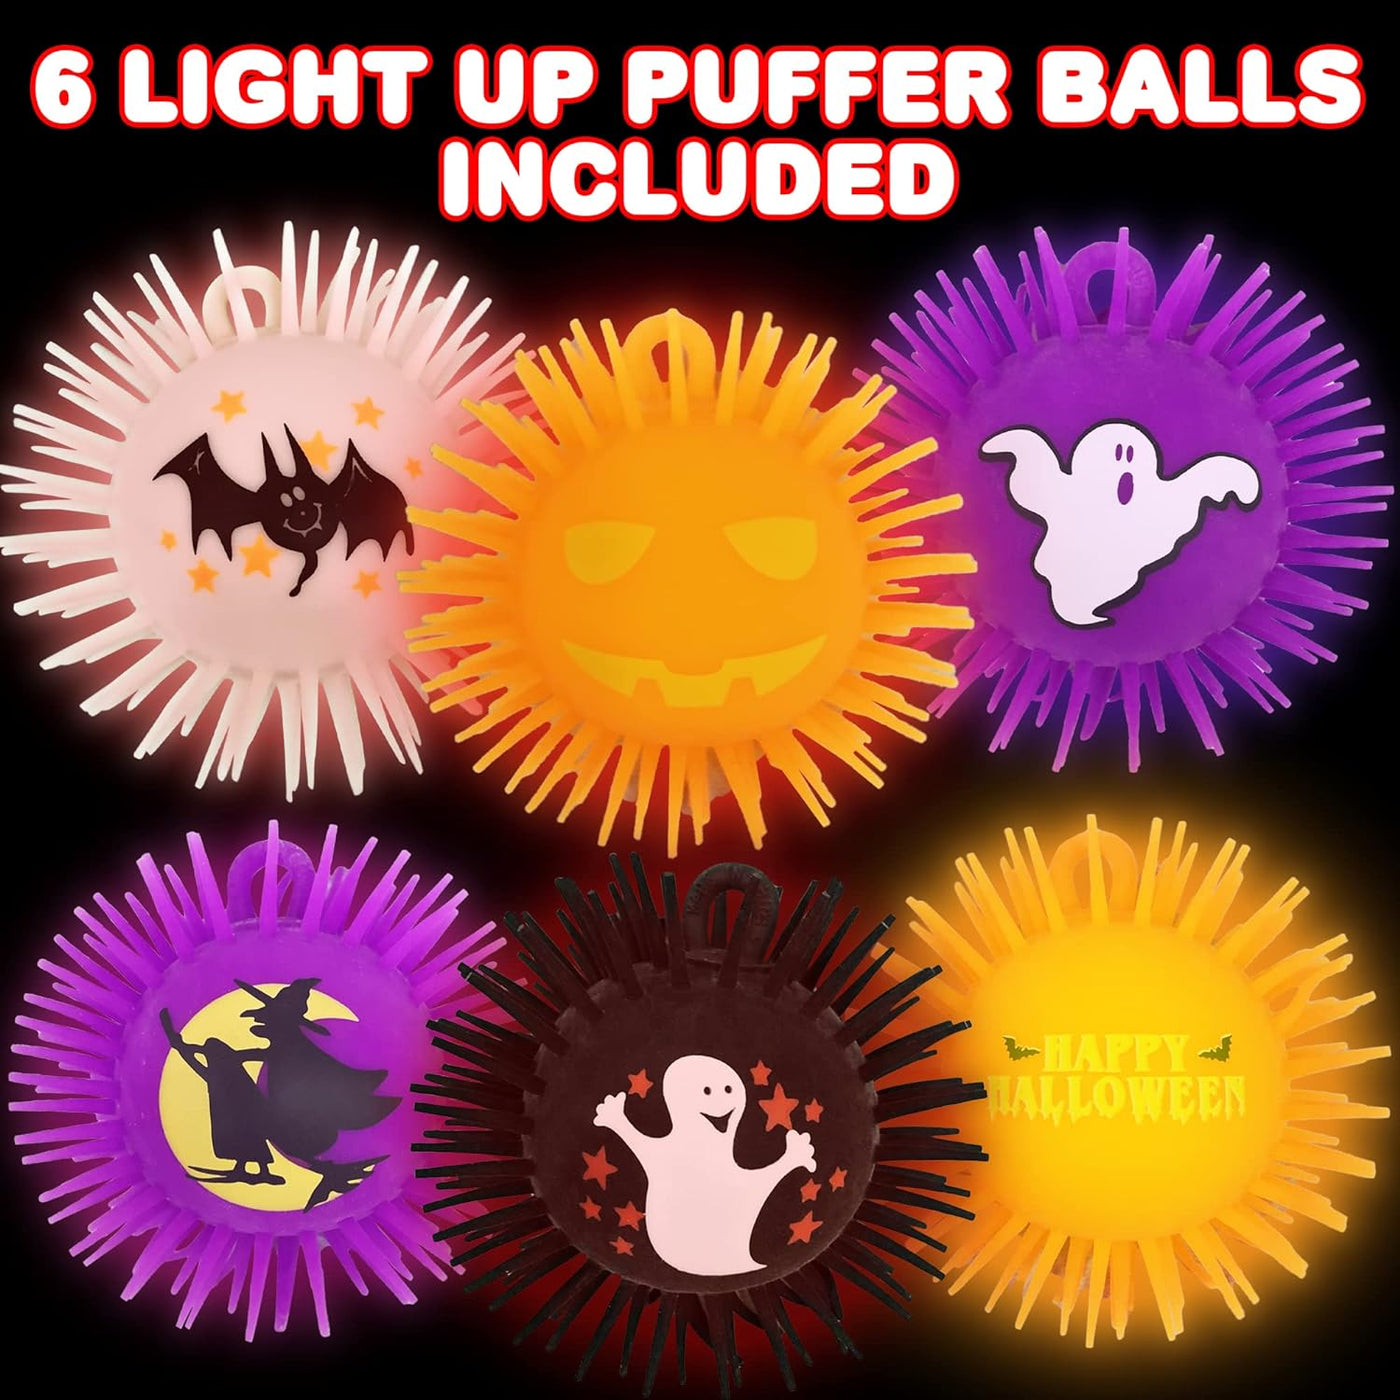 ArtCreativity Light Up Halloween Puffer Balls, Set of 6, Soft and Spiky Stress Balls for Kids in Assorted Colors, LED Anxiety Relief Toys, Halloween Party Favors, Non-Candy Trick or Treat Supplies